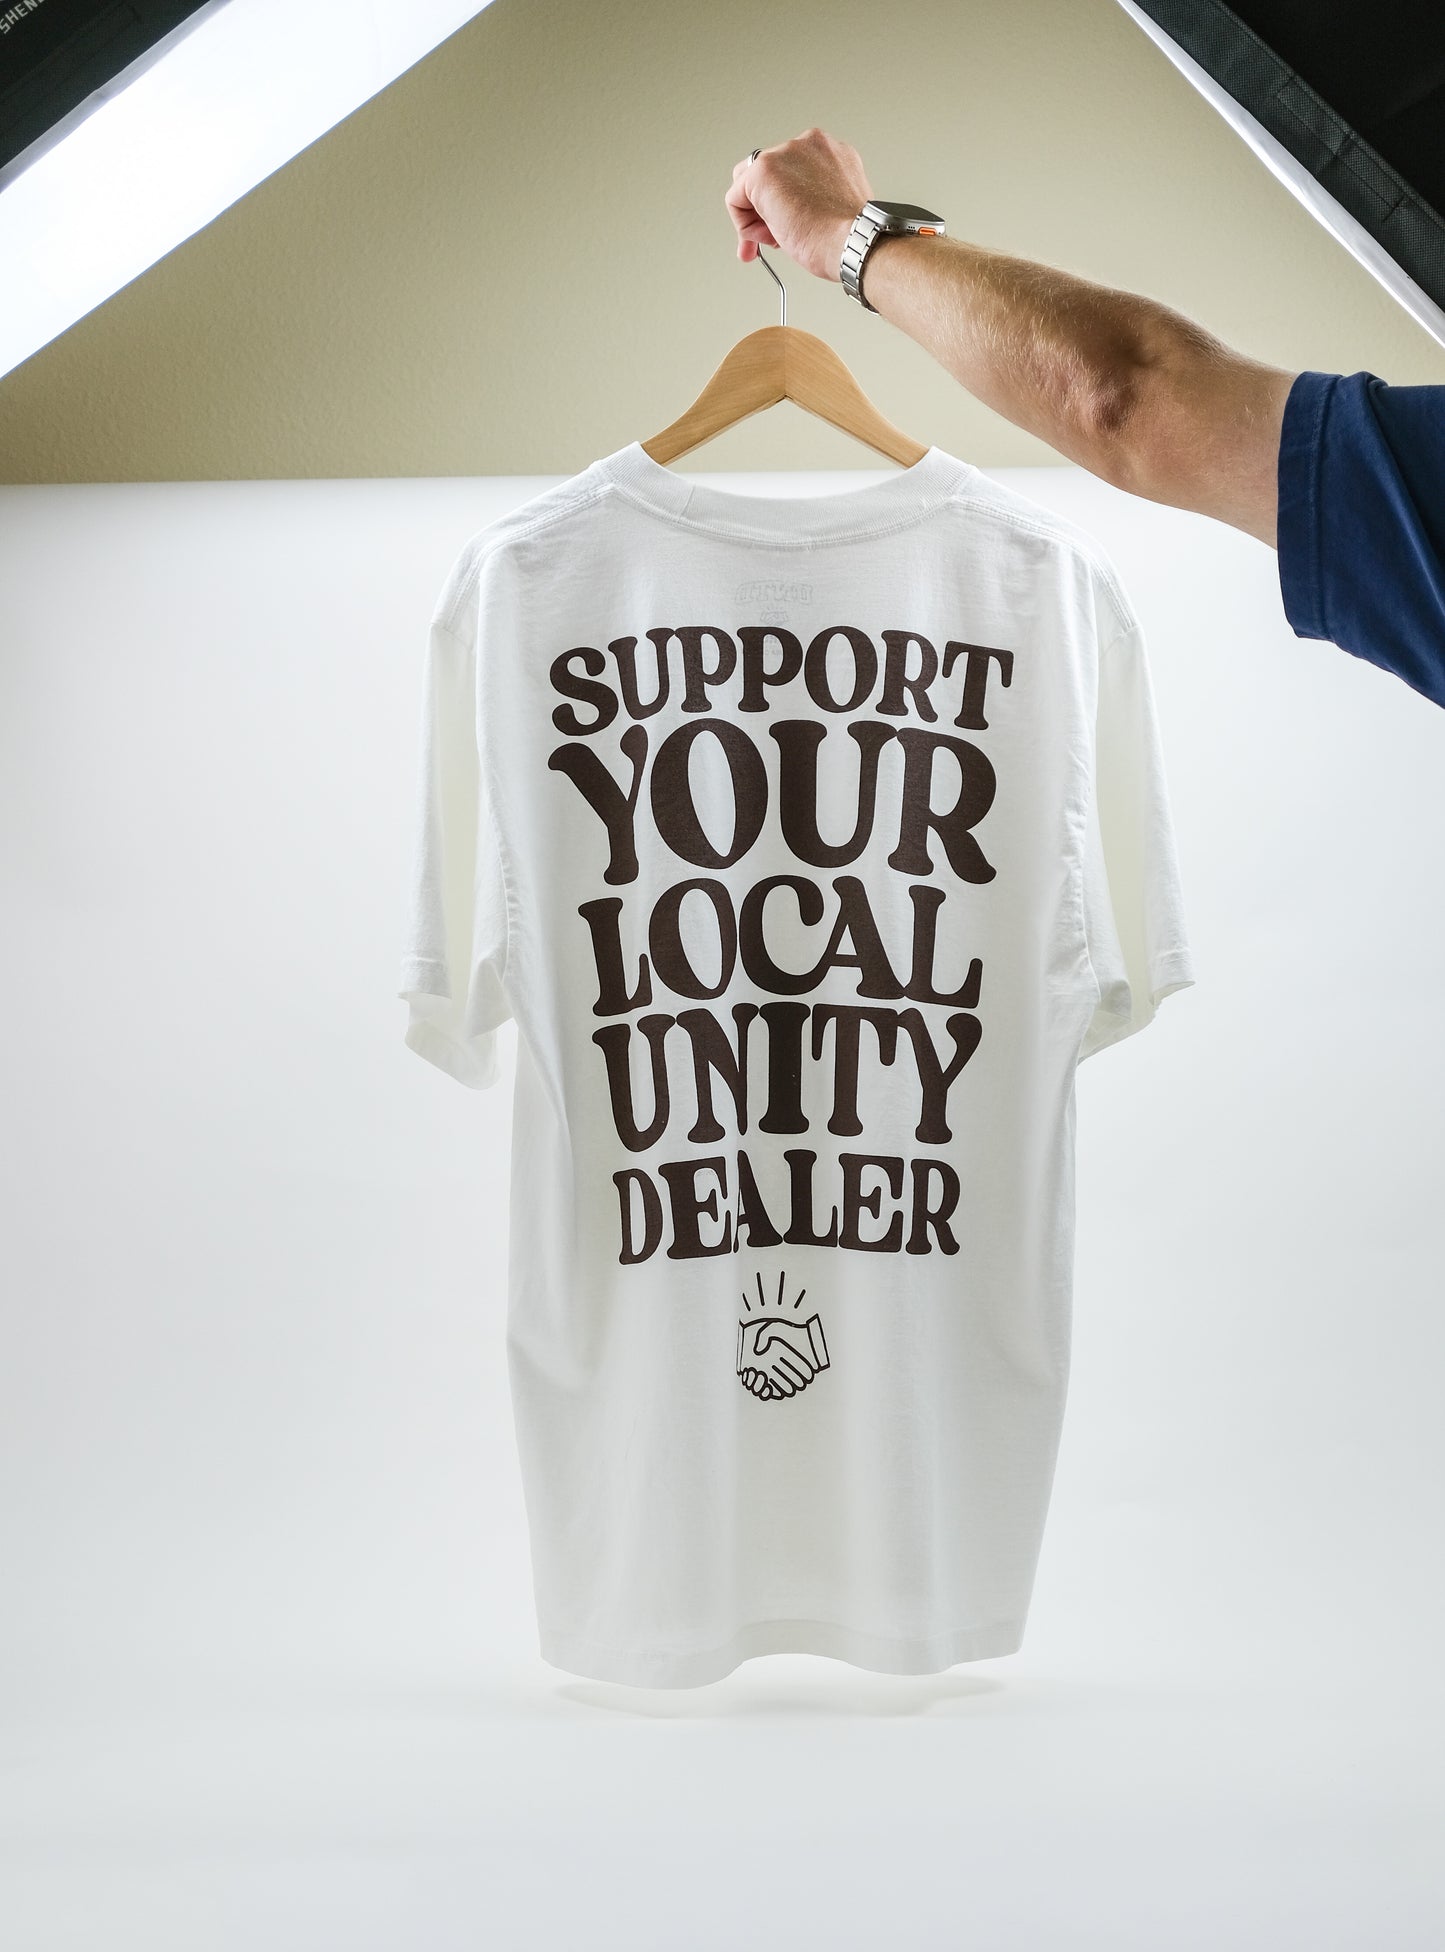 Support Your Local Unity Dealer Tee